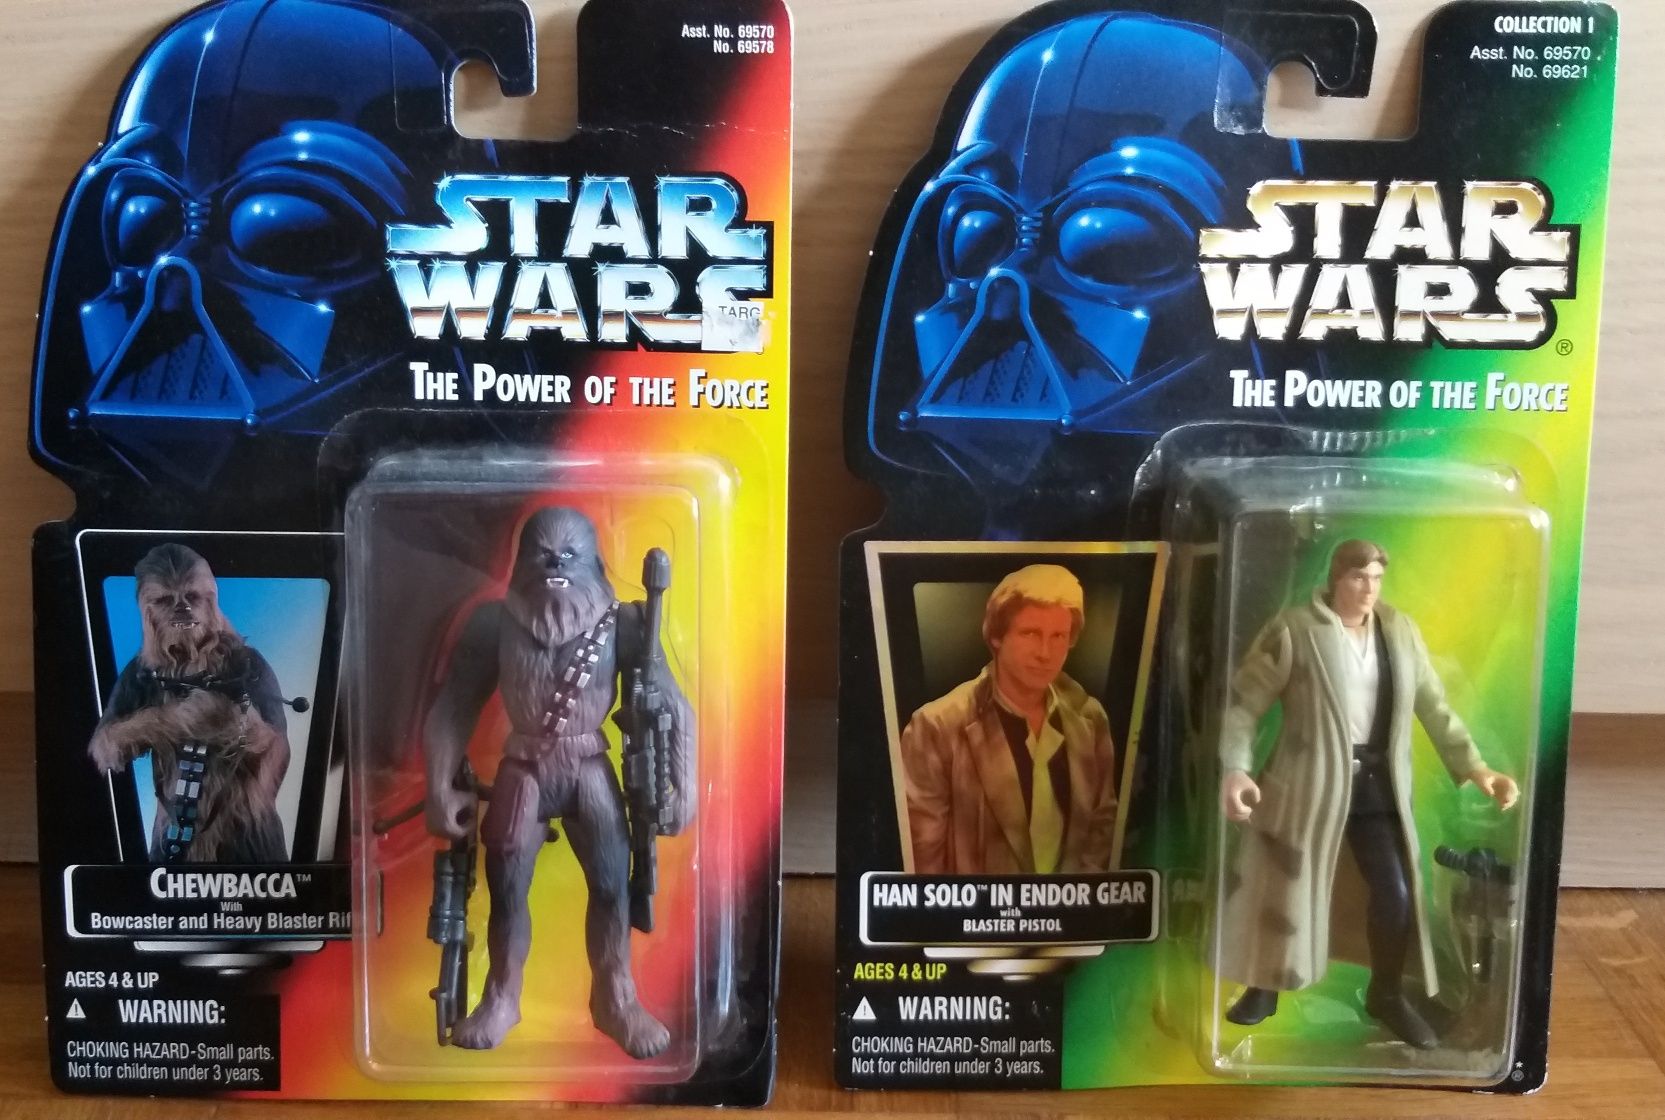 STAR WARS - The Power of the Force - Tonka Kenner Hasbro (anos 90)